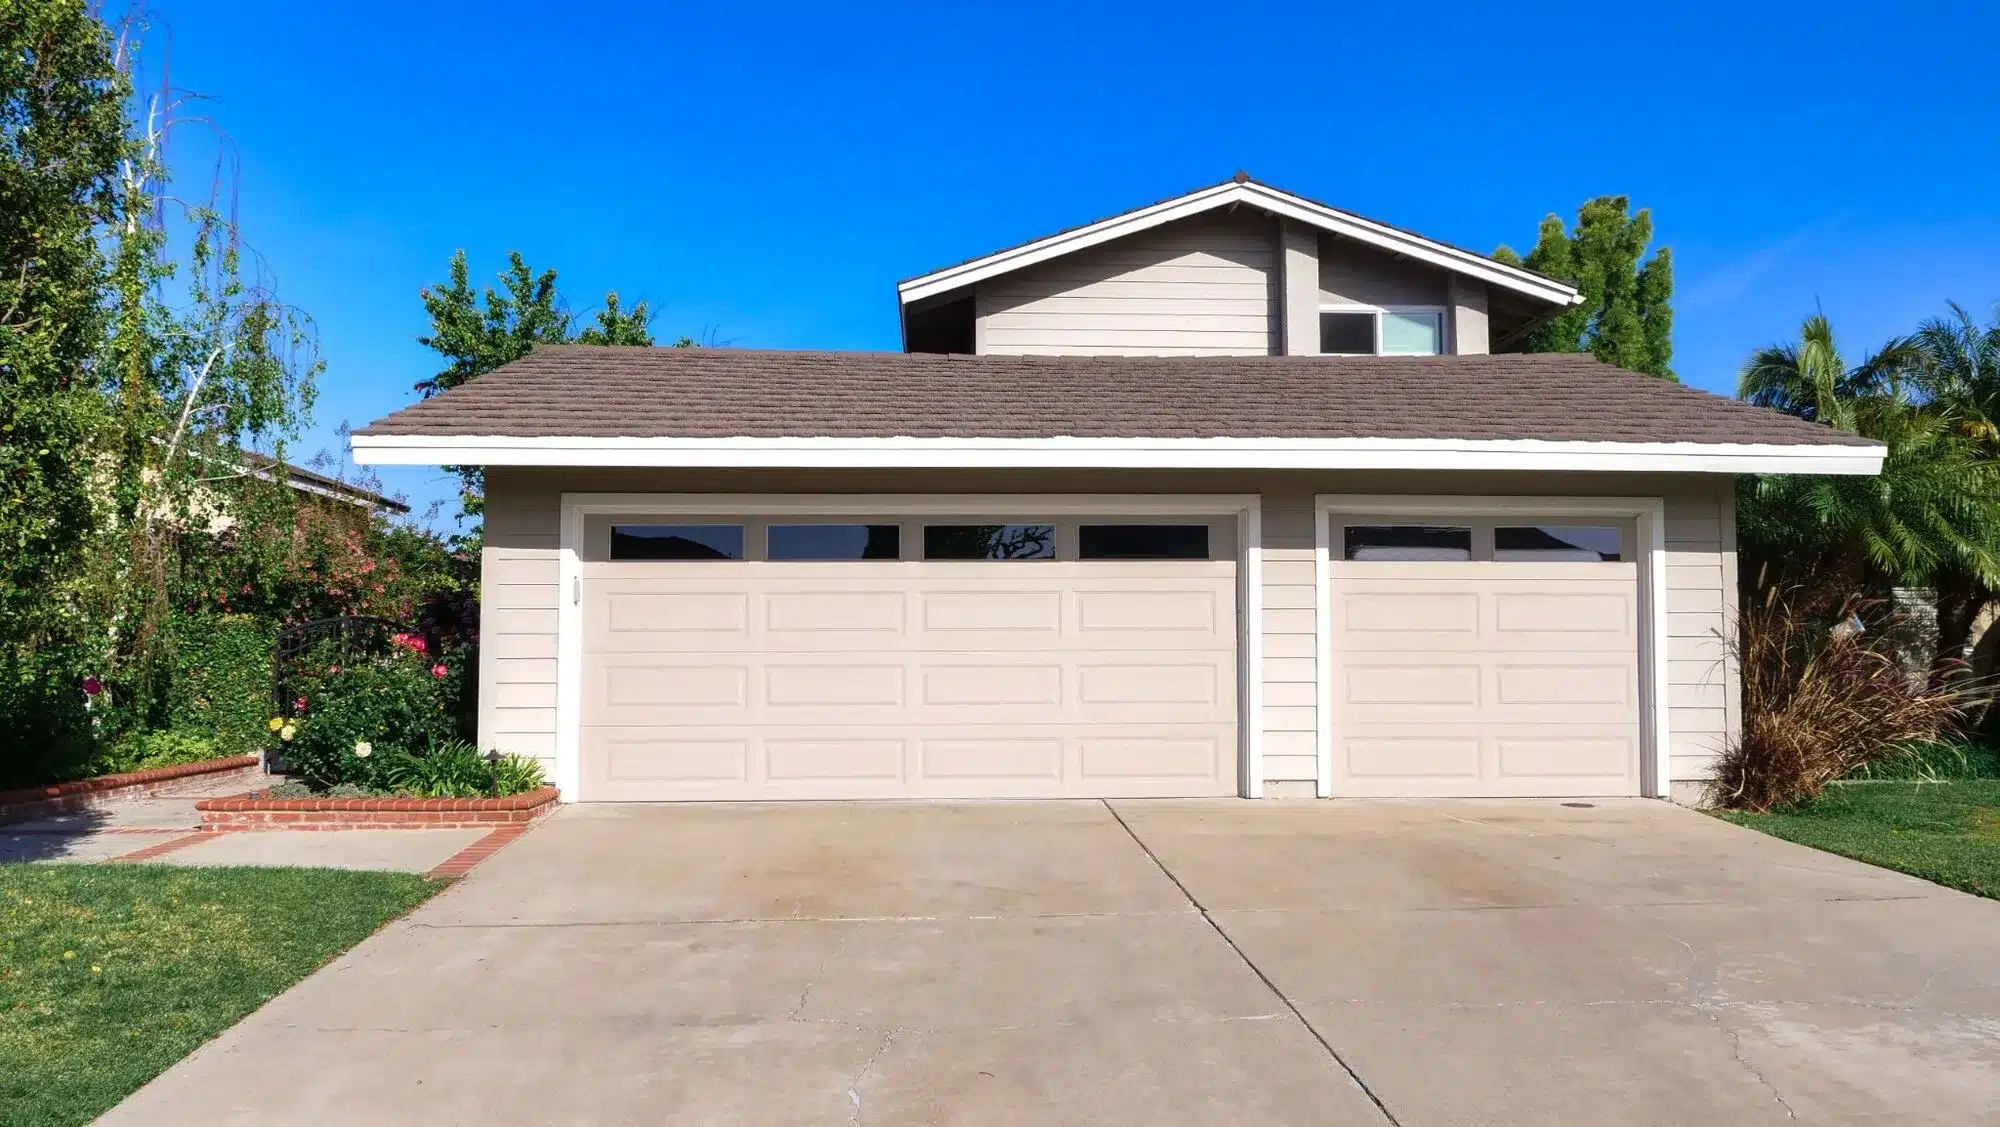 garage door repair, garage door services, garage company for a residential house project, we look forward to our next garage repair project.